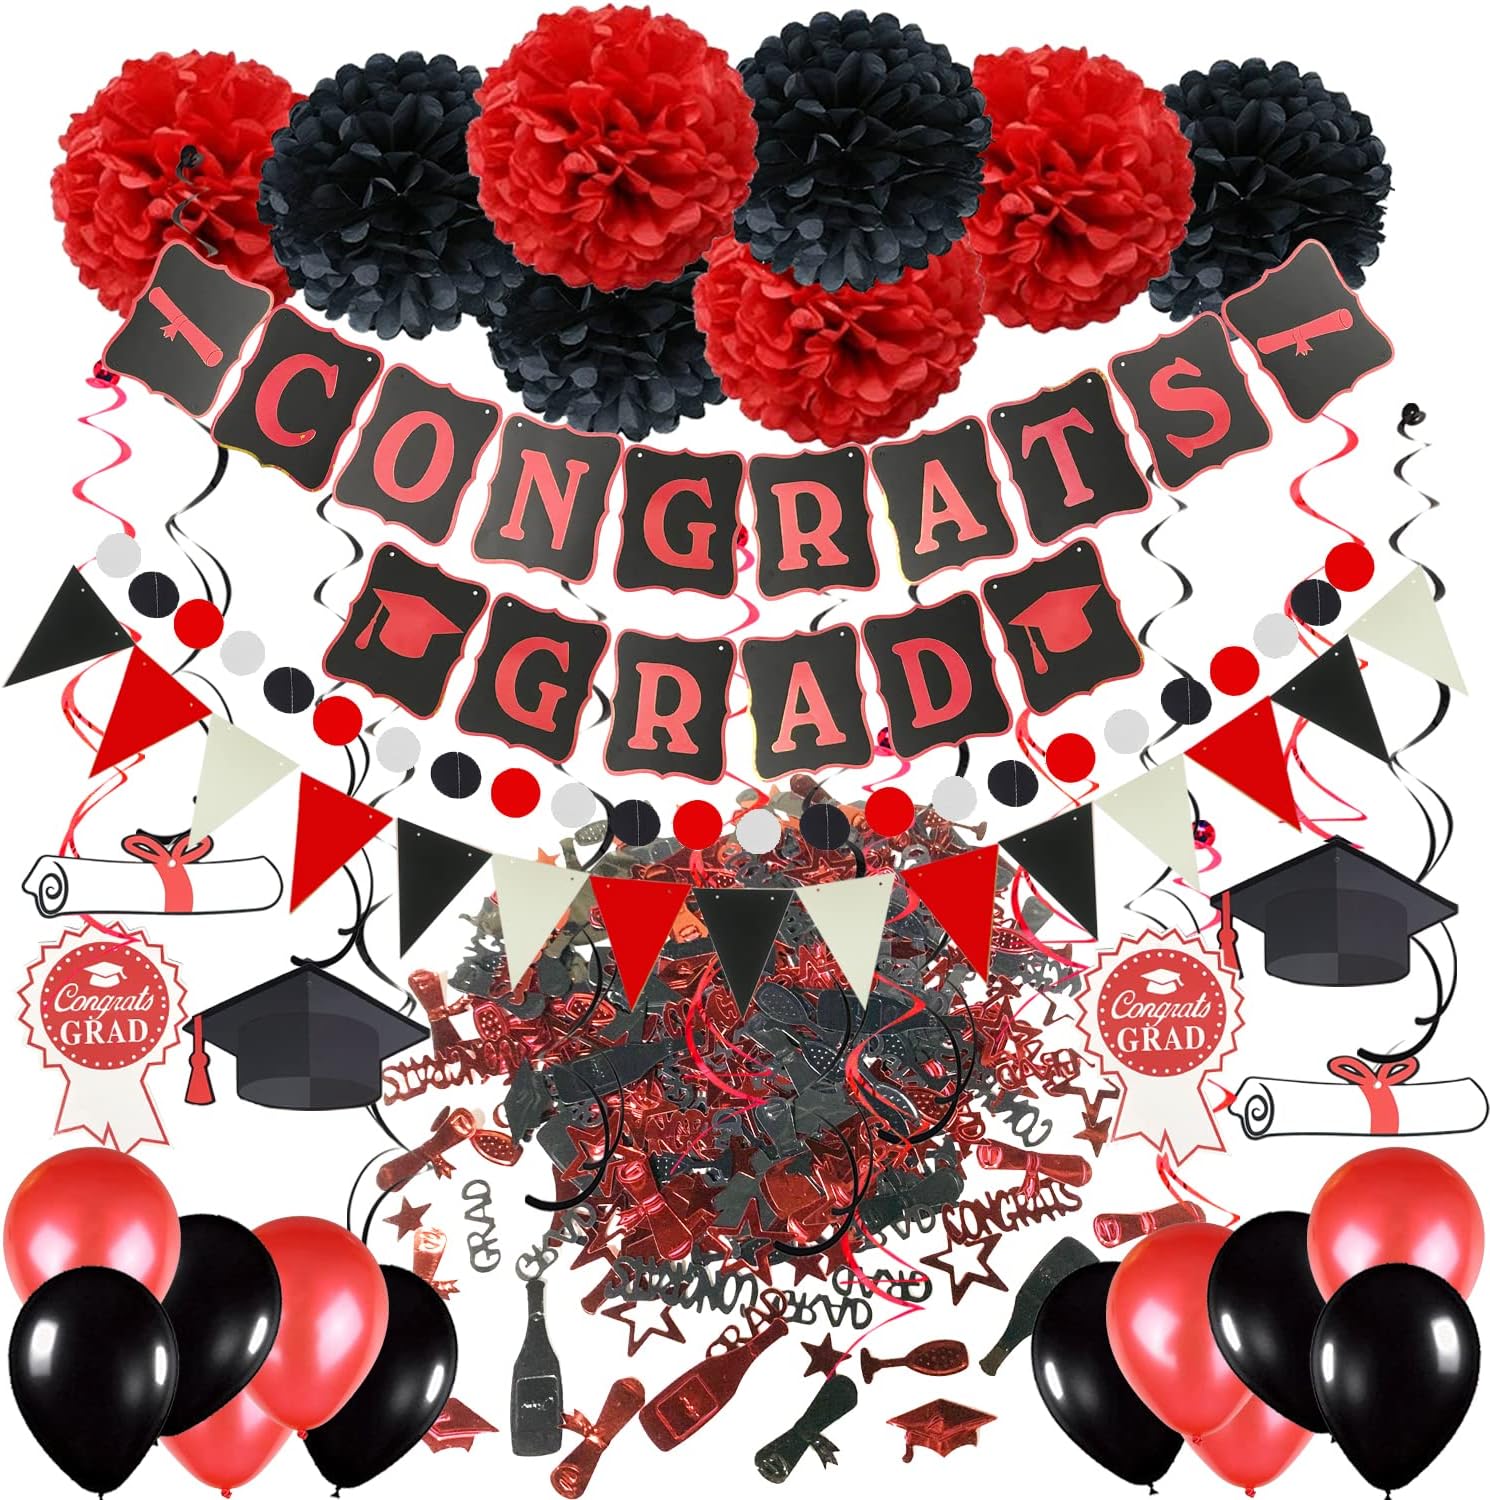 ZERODECO Graduation Decorations, Black and Red Congrats Grad Banner Paper Pompoms Hanging Swirls Graduation Confetti Paper Garland Party Balloons for Grad Party Decoration Supplies